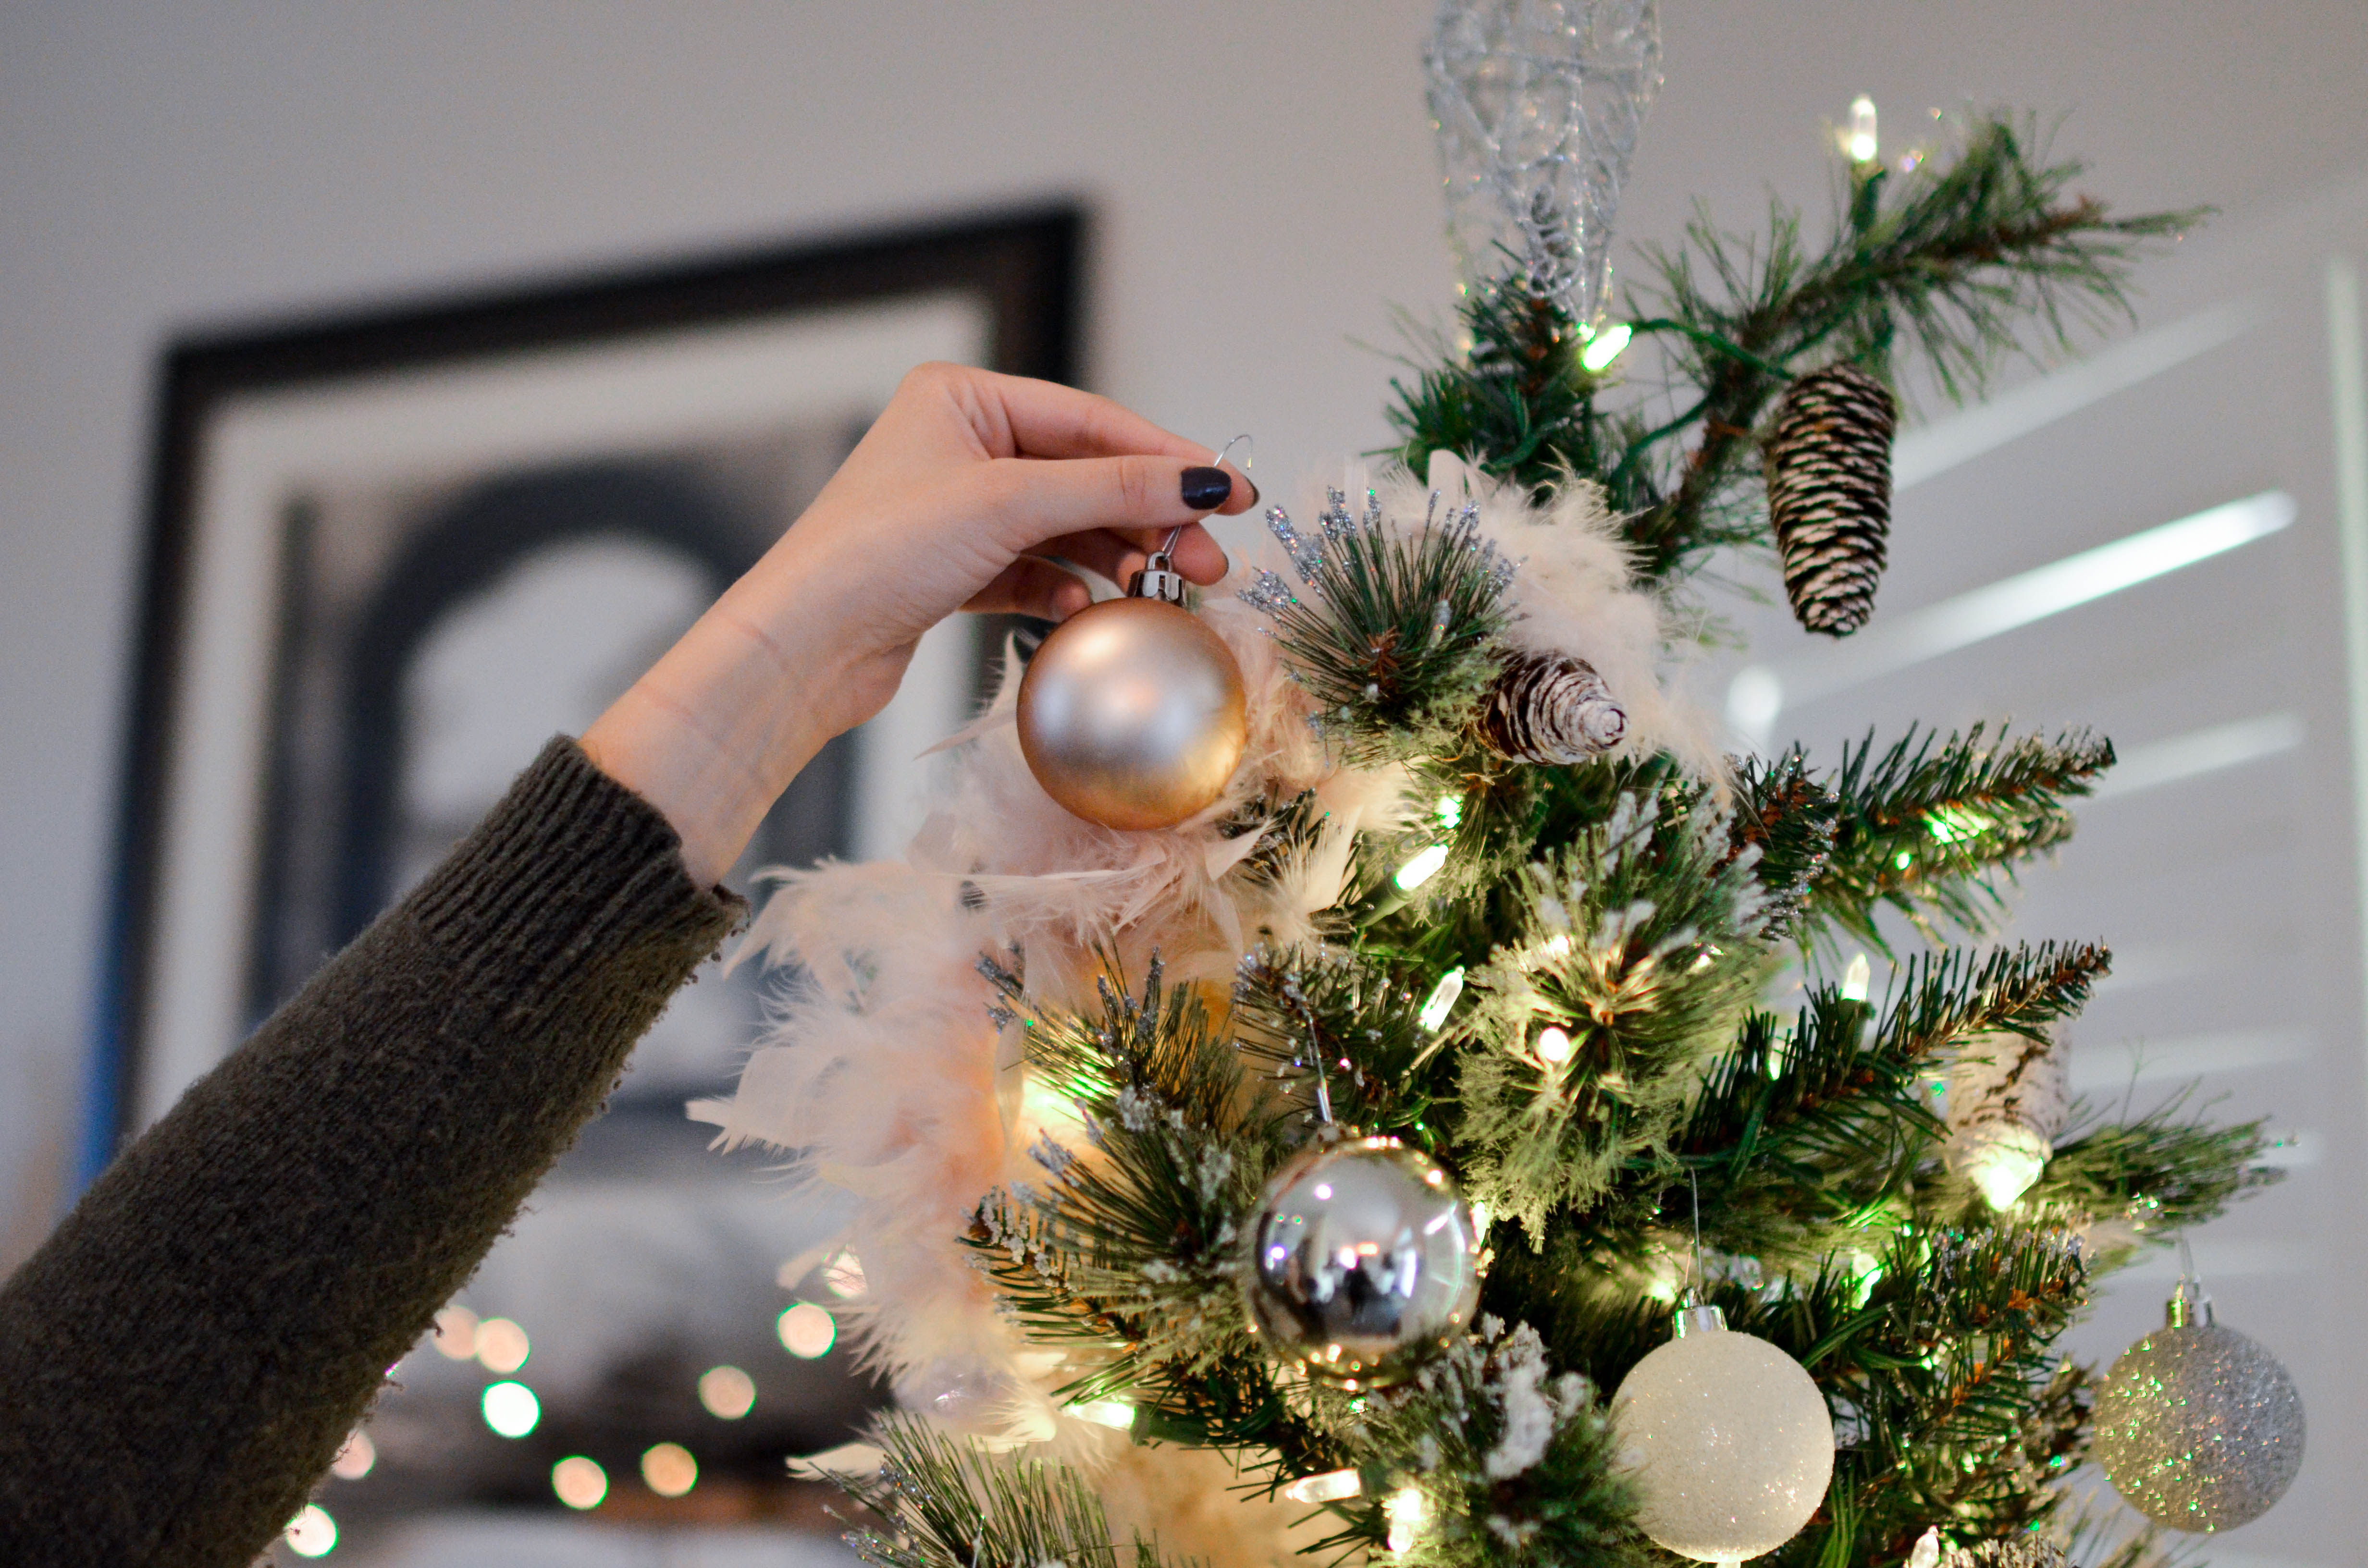 https://www.pexels.com/photo/person-holding-beige-bauble-near-christmas-tree-712318/